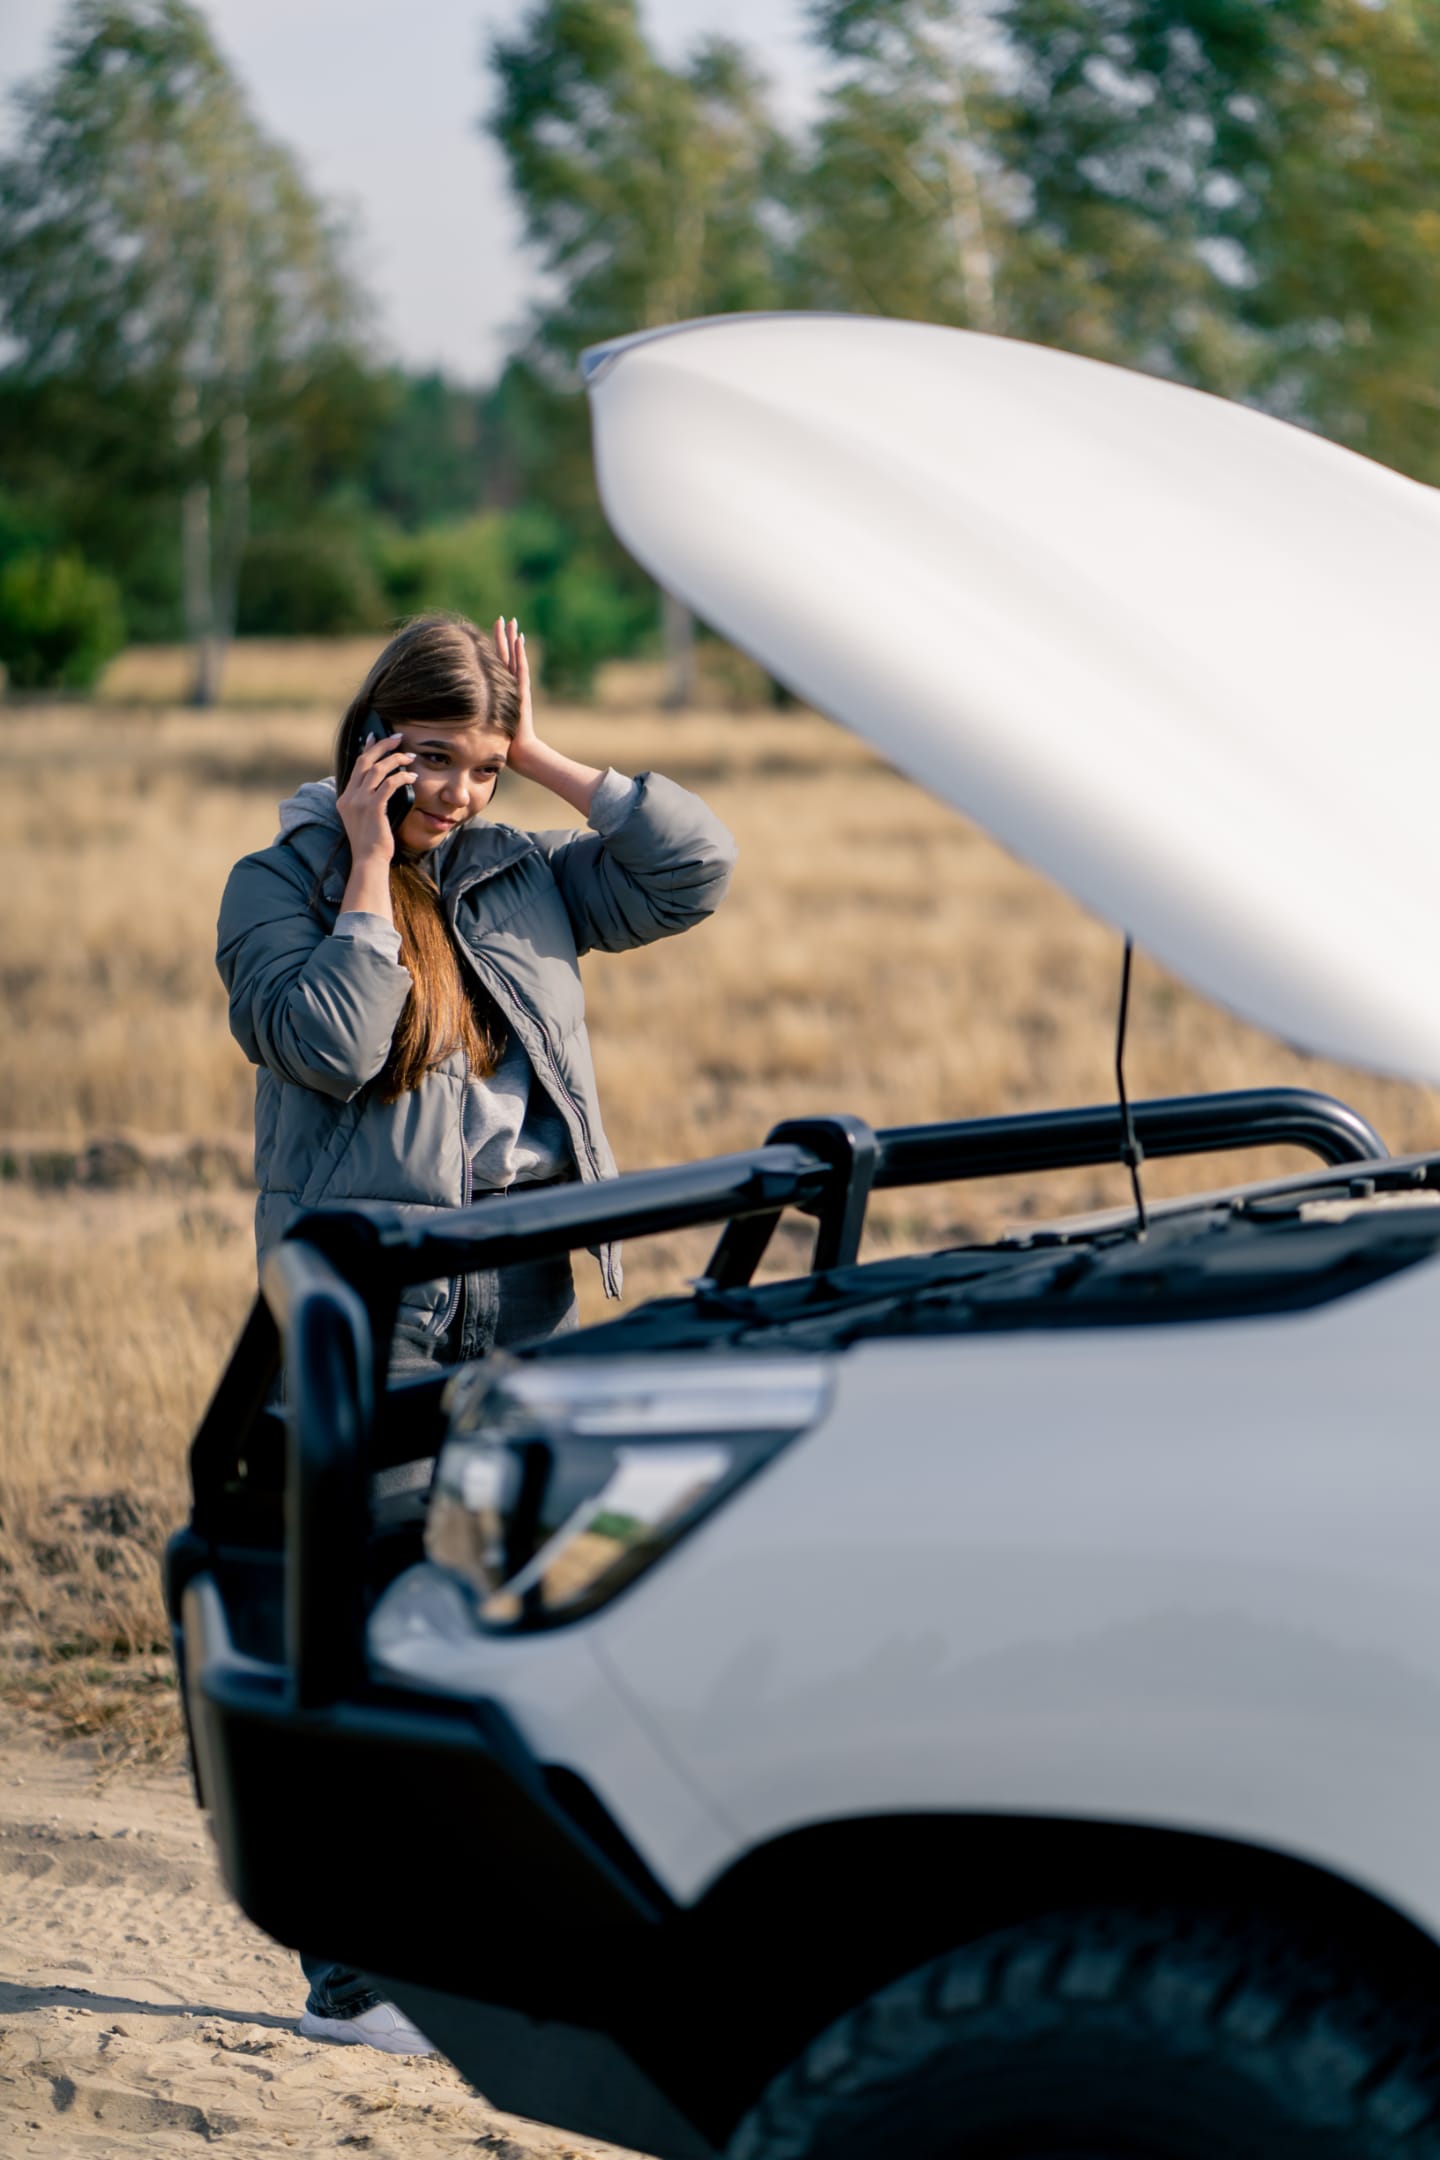 Preventing Summer Breakdowns: Essential Tips to Make Your Car Road Trip Ready